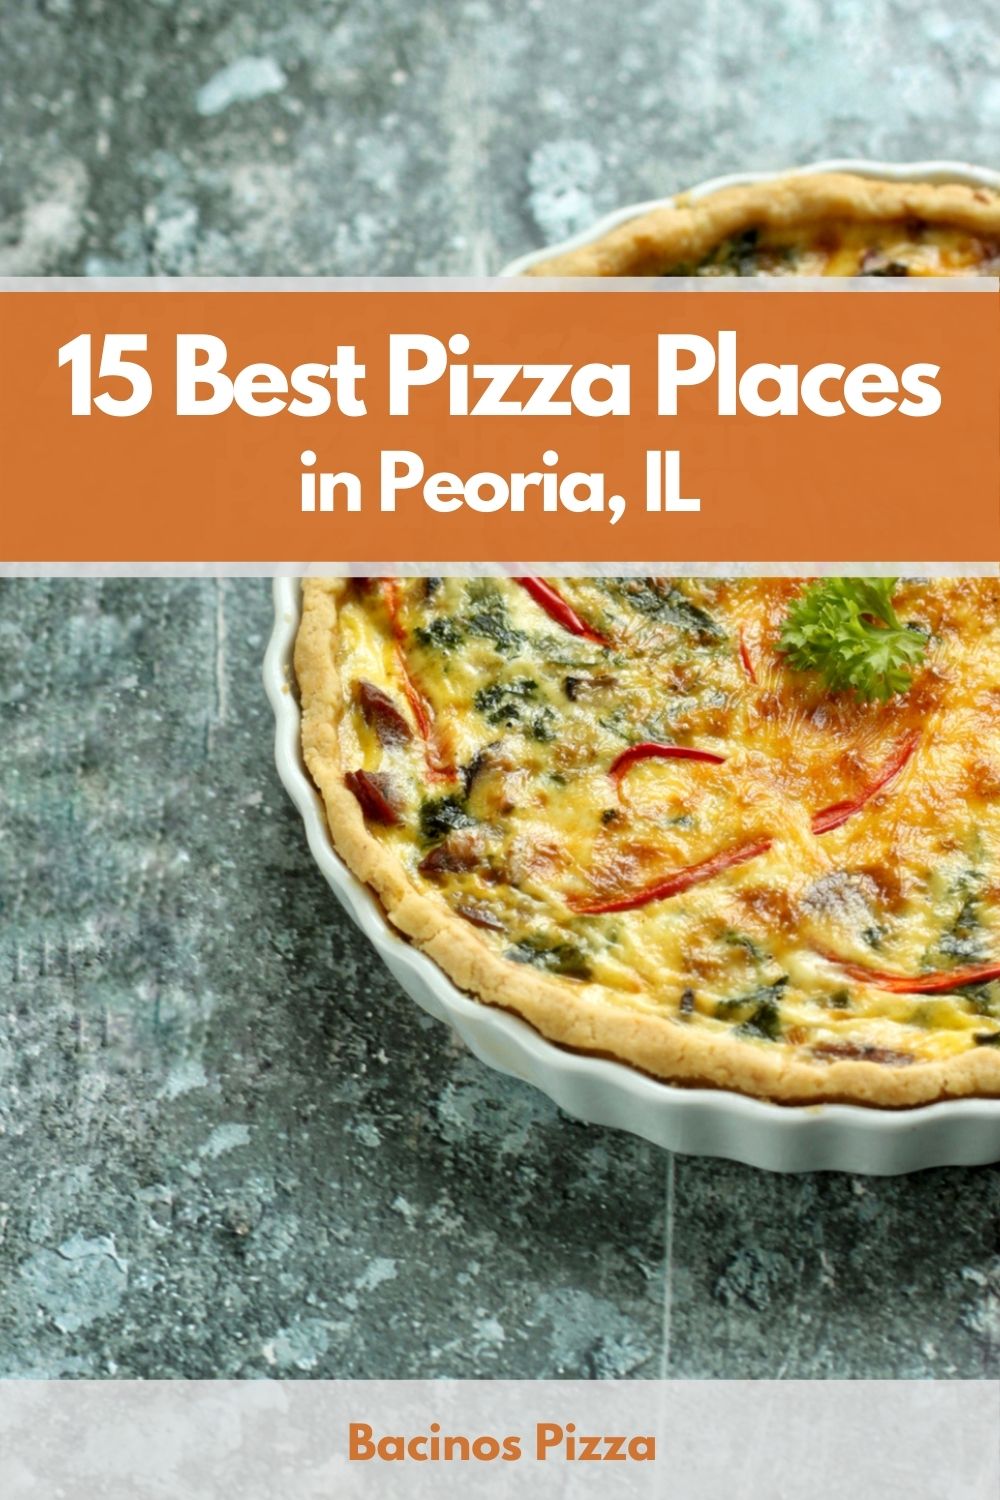 15 Best Pizza Places in Peoria, IL pin 2